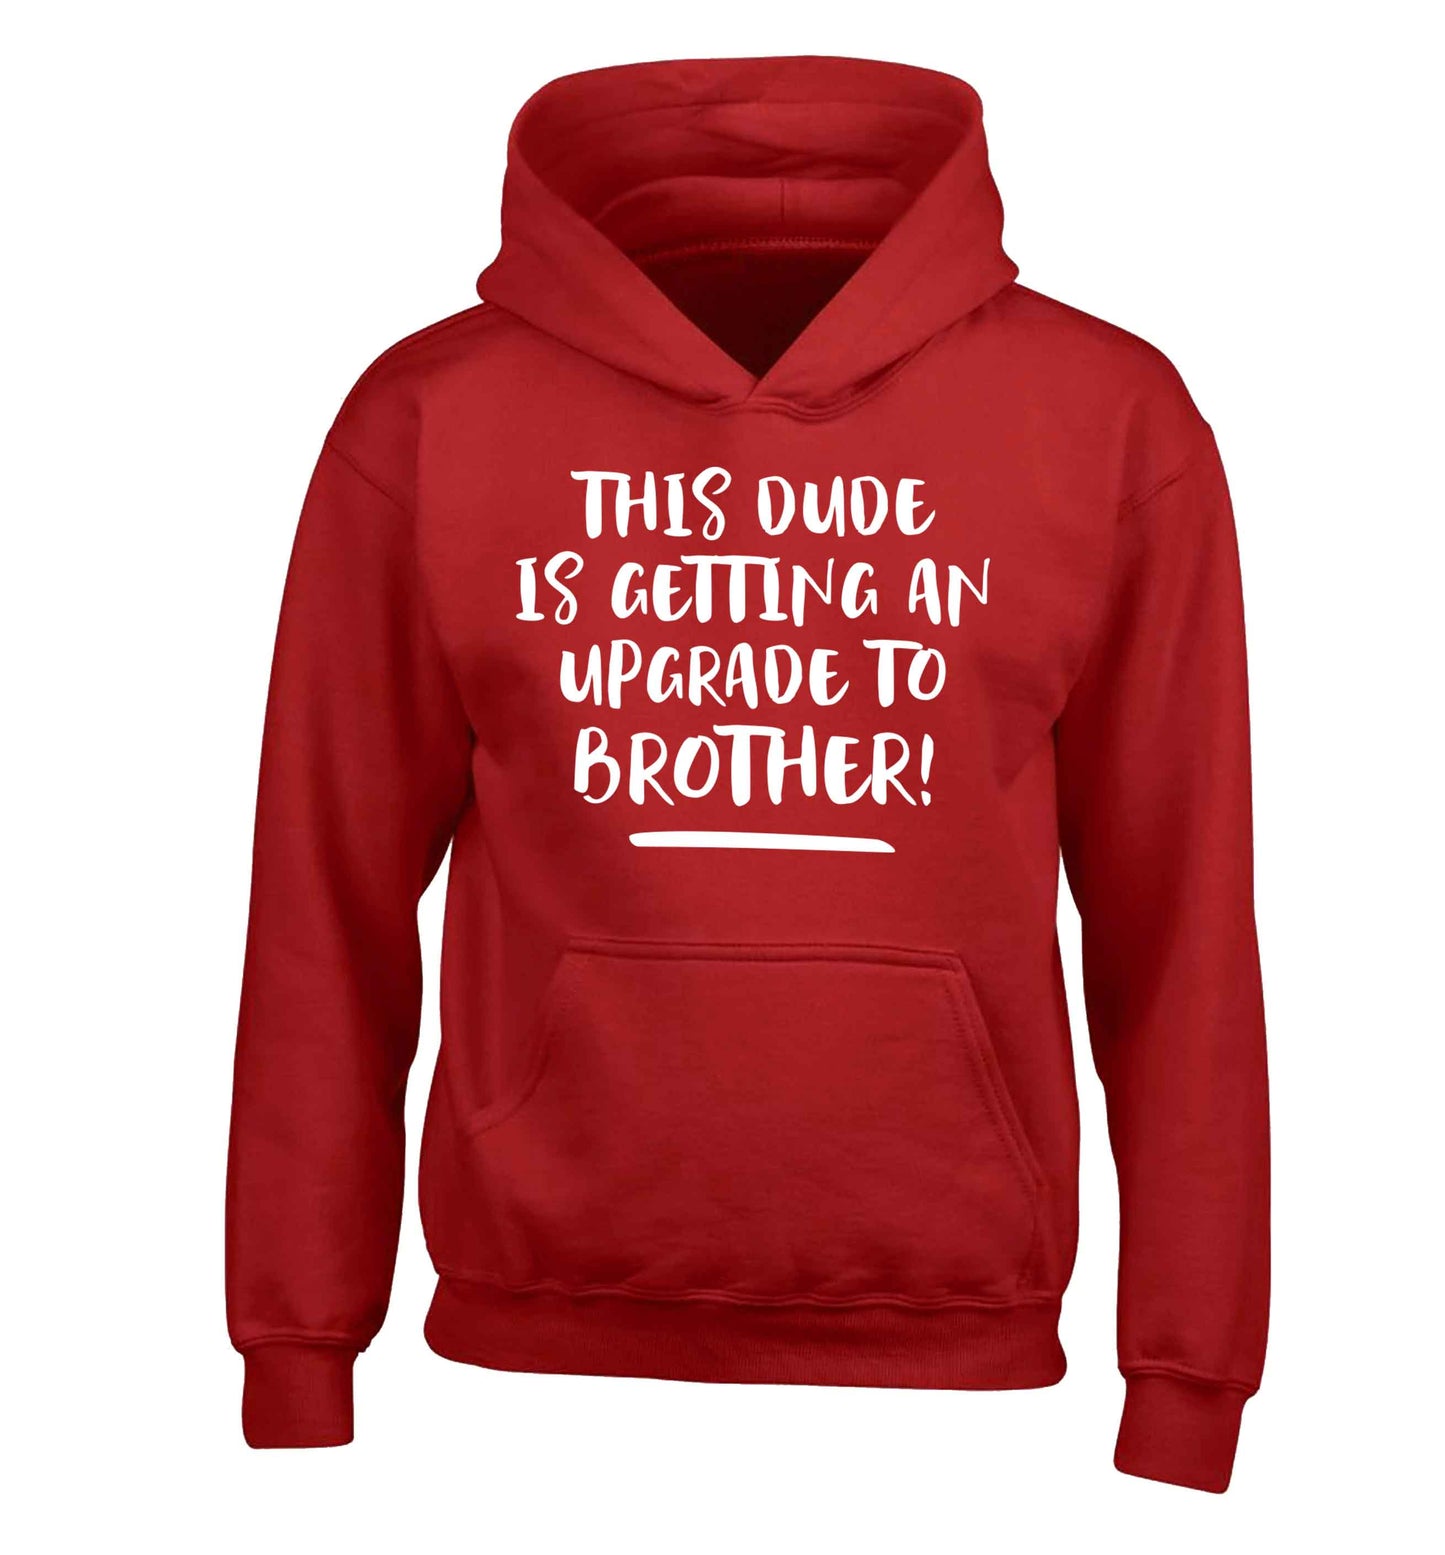 This dude is getting an upgrade to brother! children's red hoodie 12-13 Years